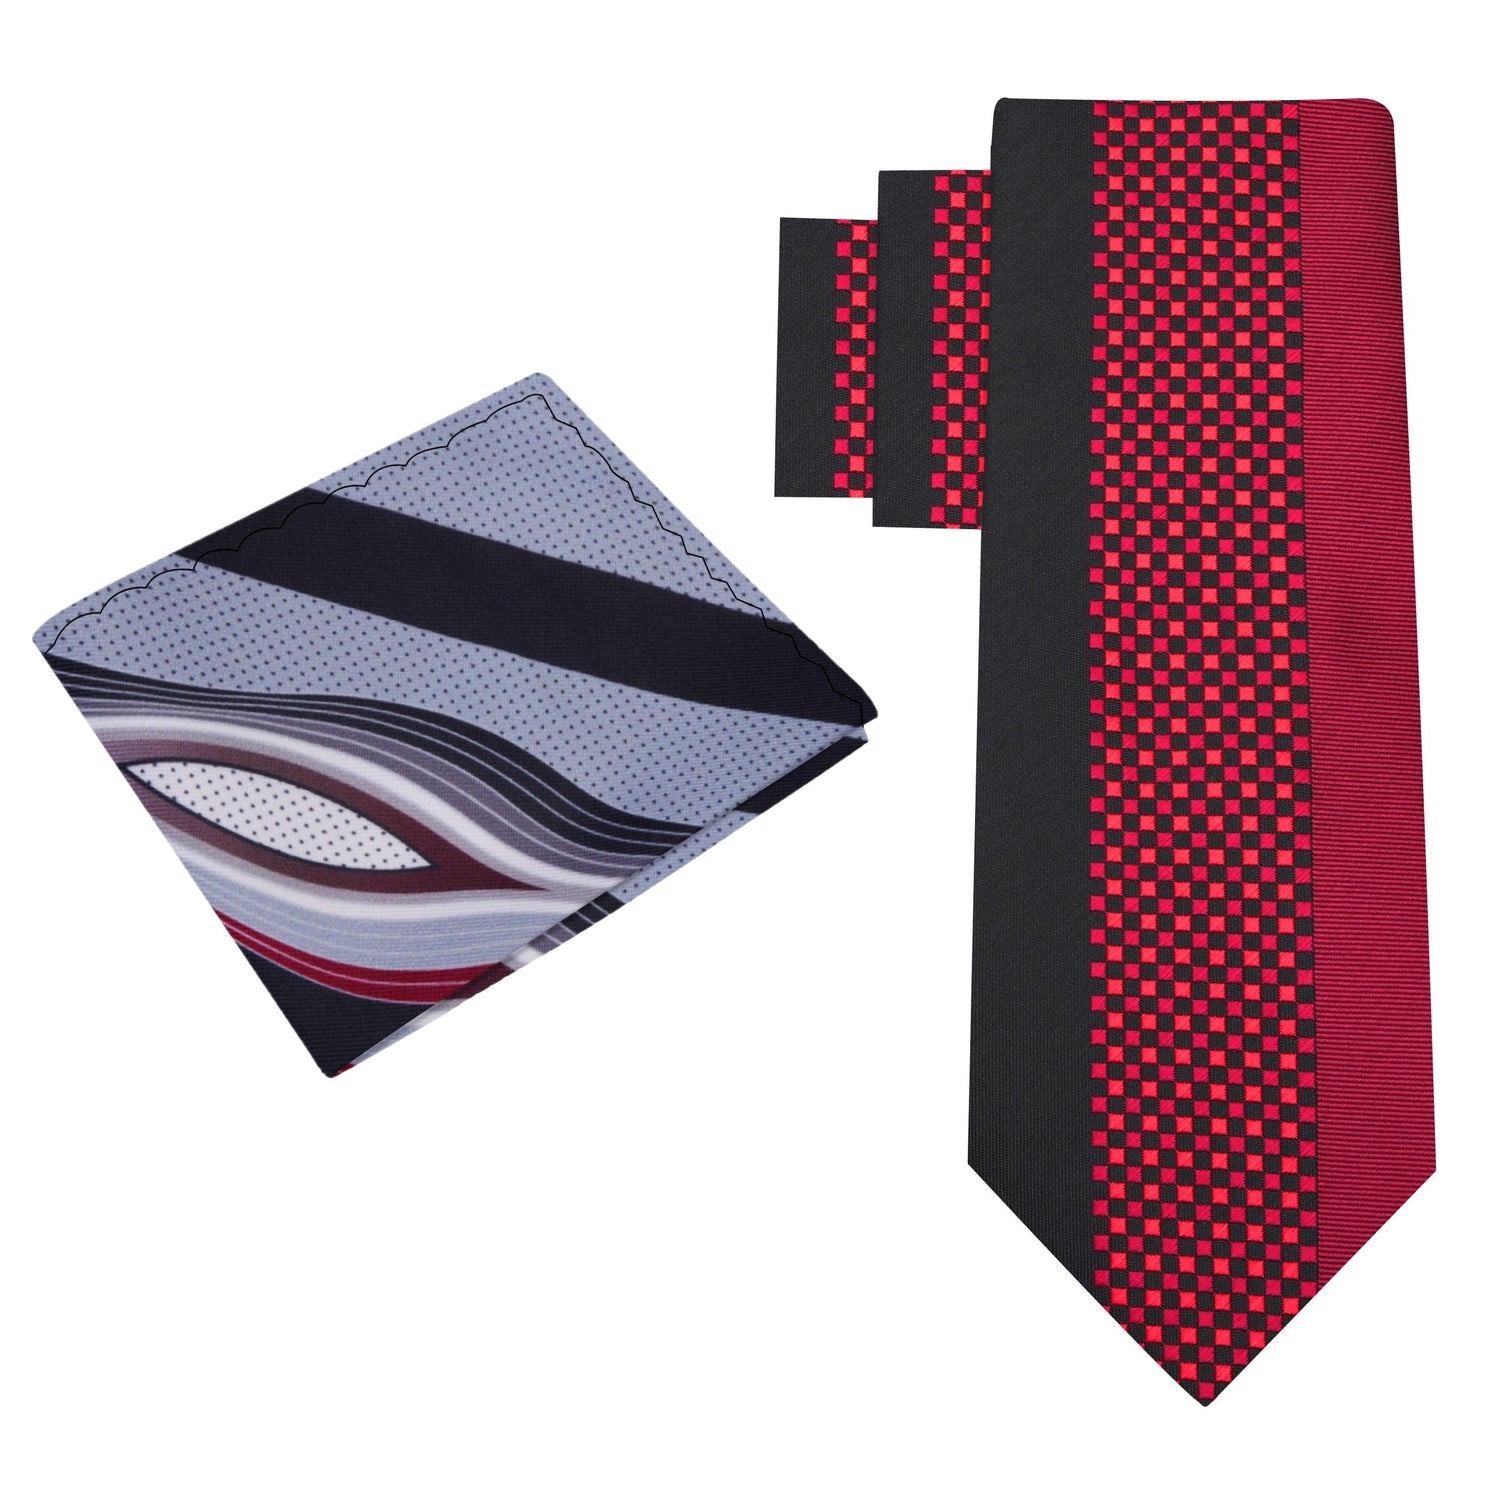 Alt View: Red & Black Check Necktie with Accenting Grey, Black and Red Square